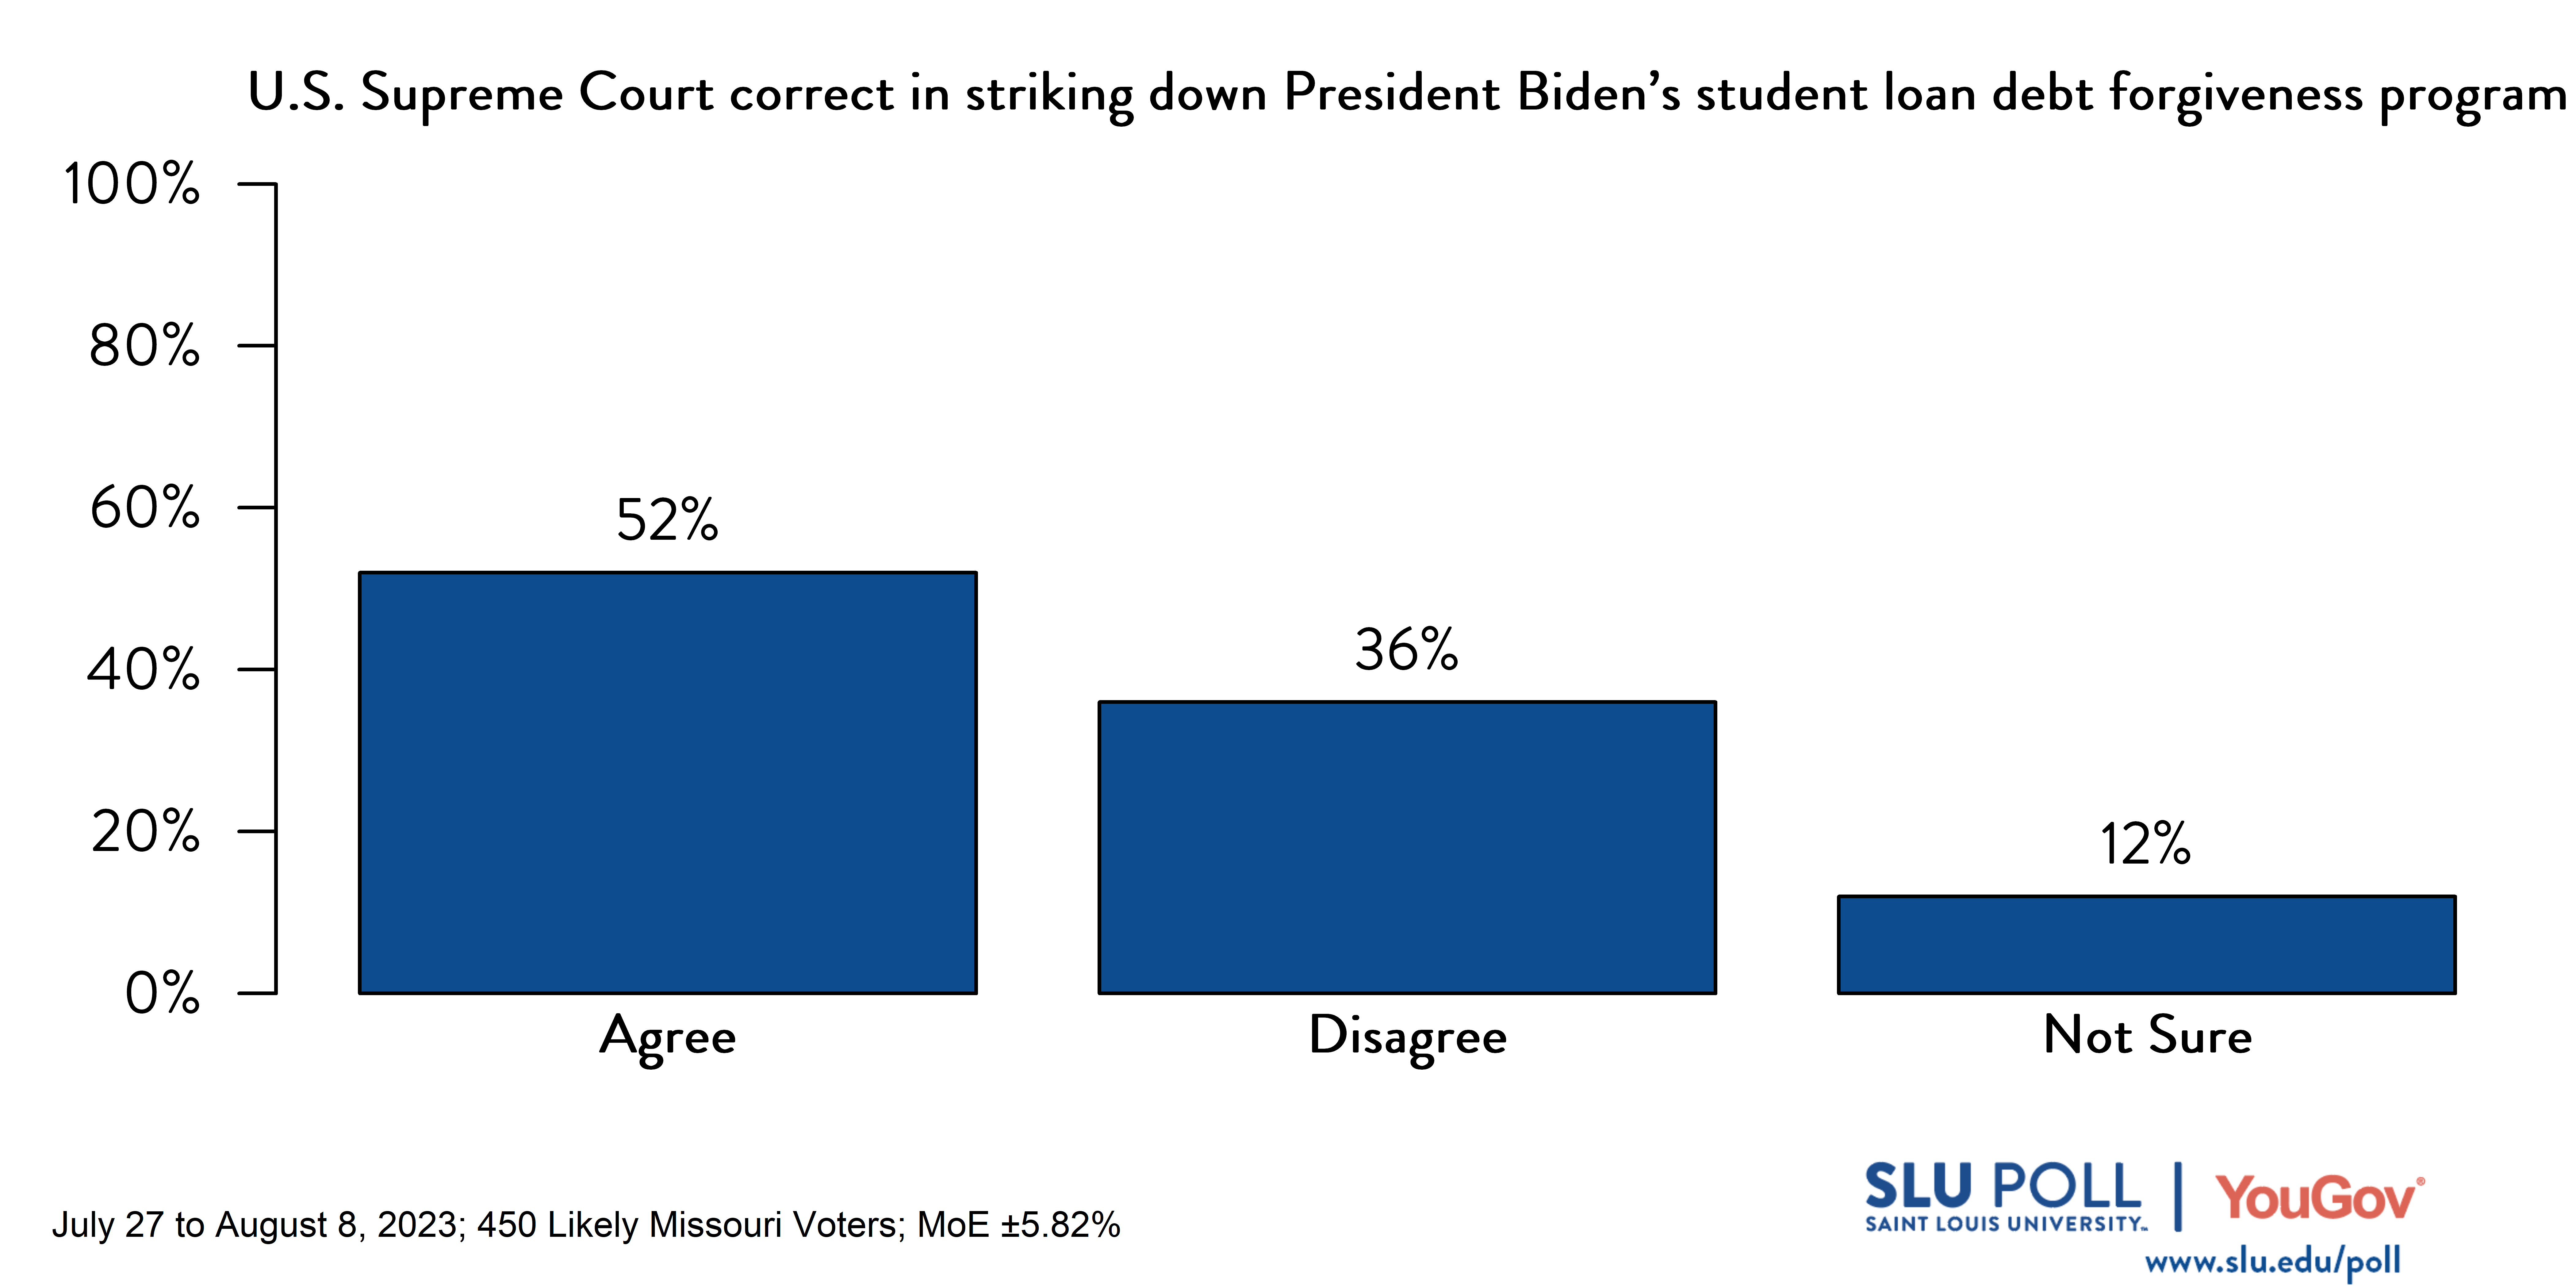 Likely voters' responses to 'Do you agree or disagree with the following statements: The U.S. Supreme Court was correct in striking down President Biden's student loan debt forgiveness program.': 52% Agree, 36% Disagree, and 12% Not Sure. 